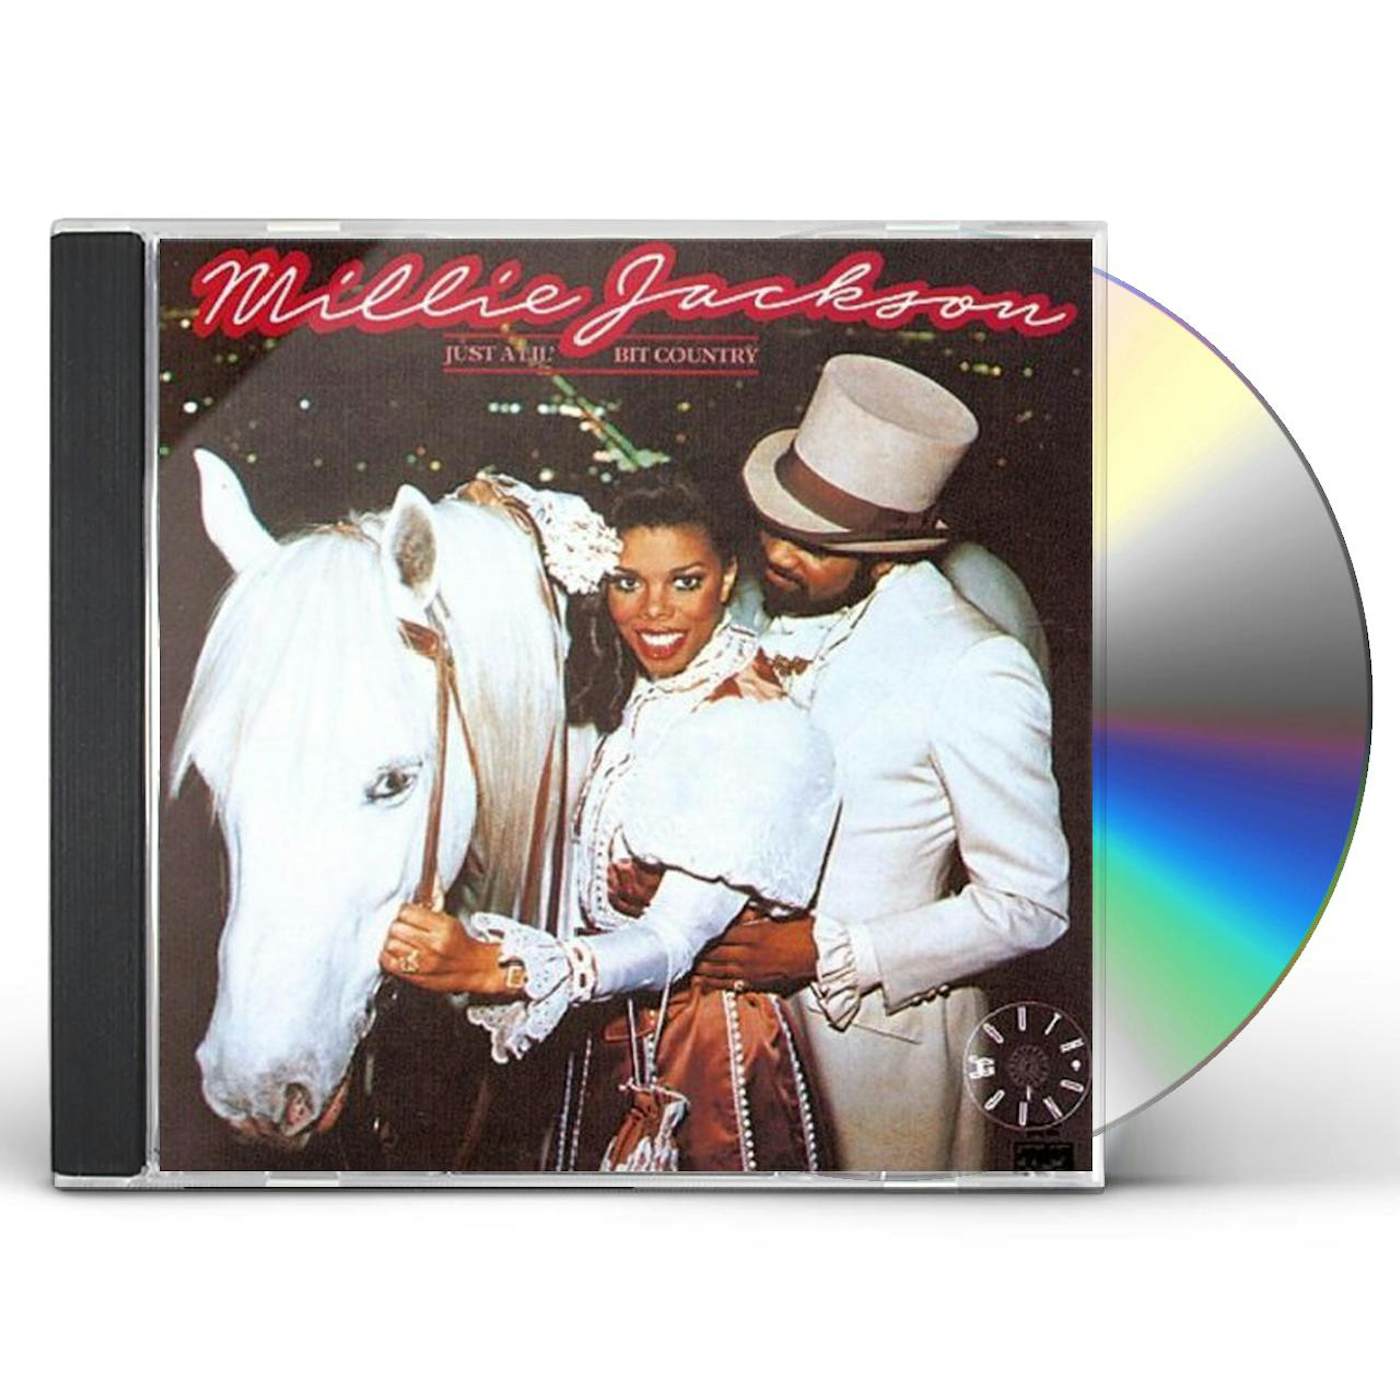 Millie Jackson JUST A LIL BIT COUNTRY CD